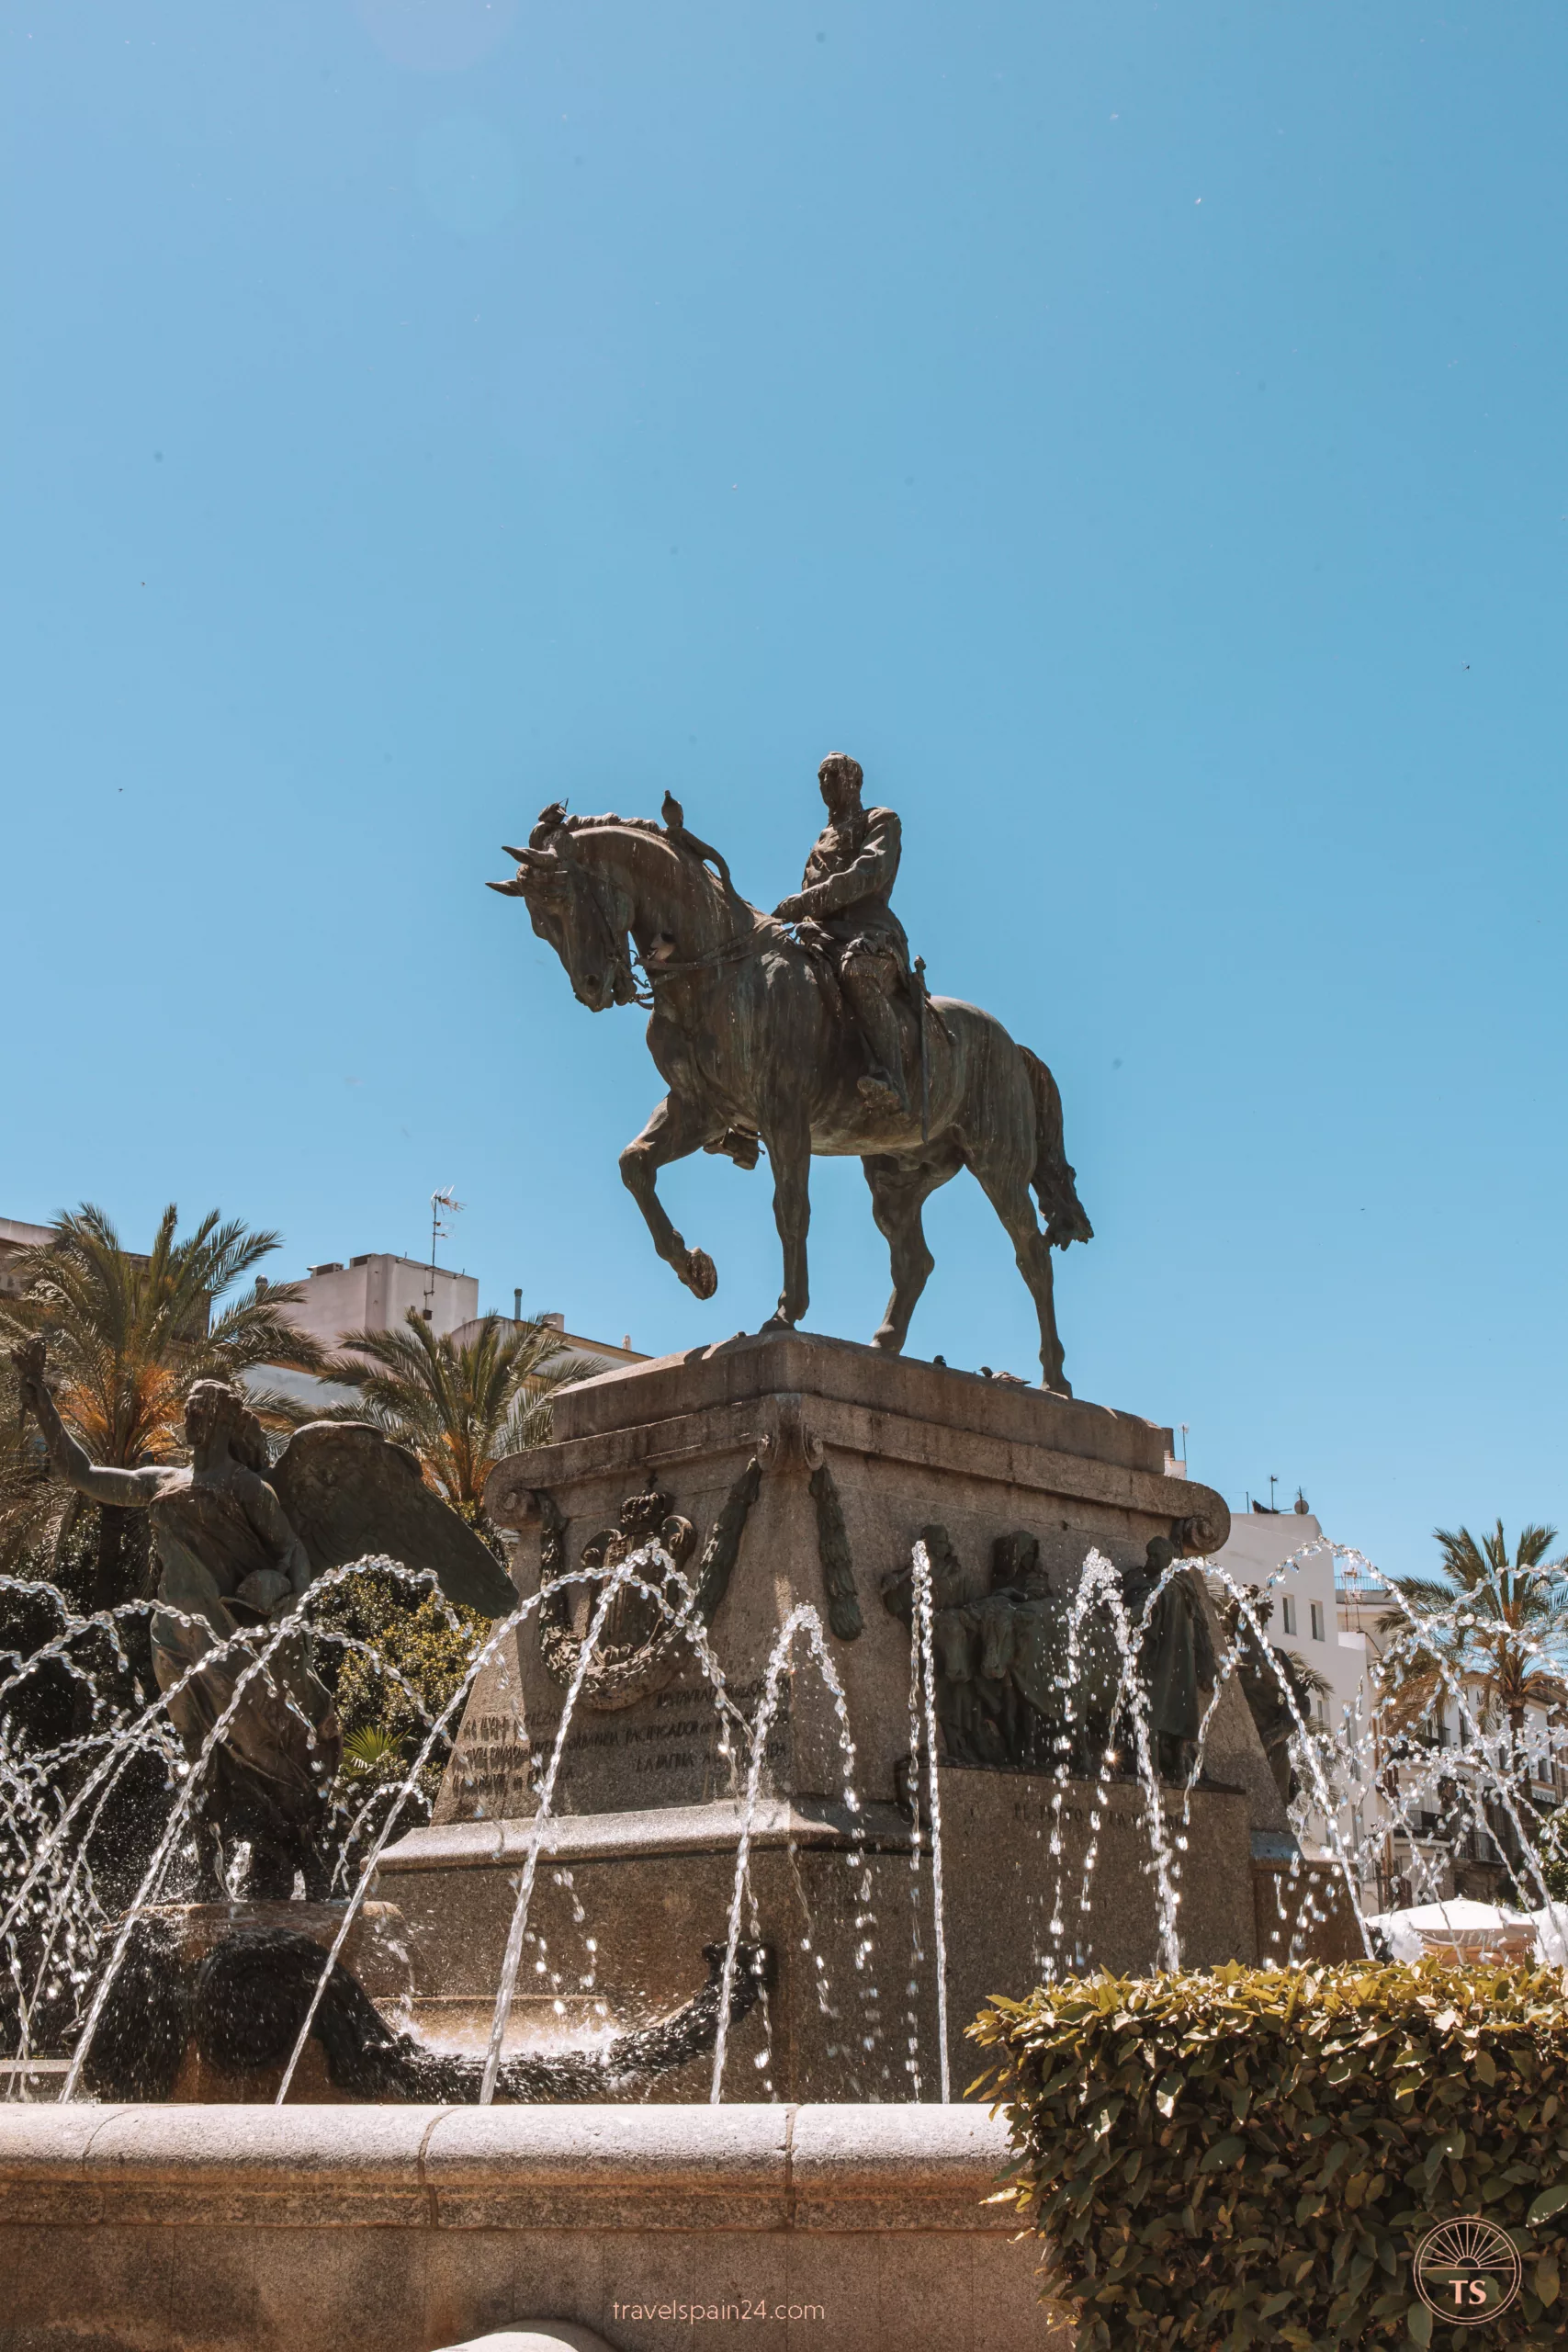 Statue of Miguel Primo de Rivera in Jerez de la Frontera, surrounded by a fountain. This image showcases one of the notable monuments in the city.